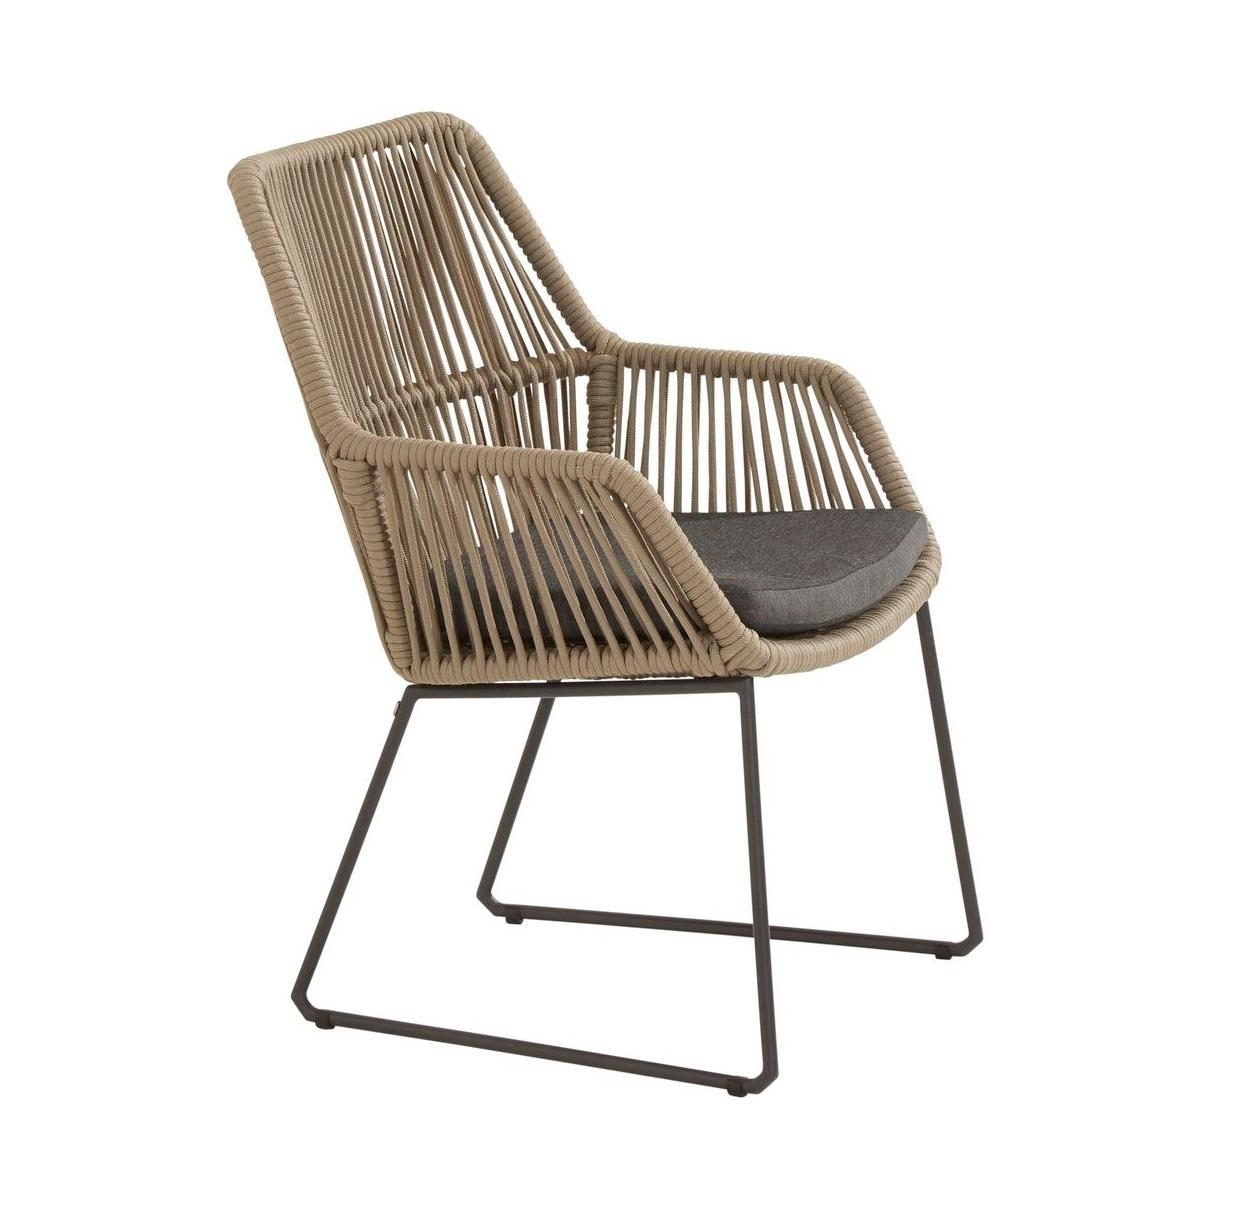 rope weave weatherproof garden dining chair in pebble cut out